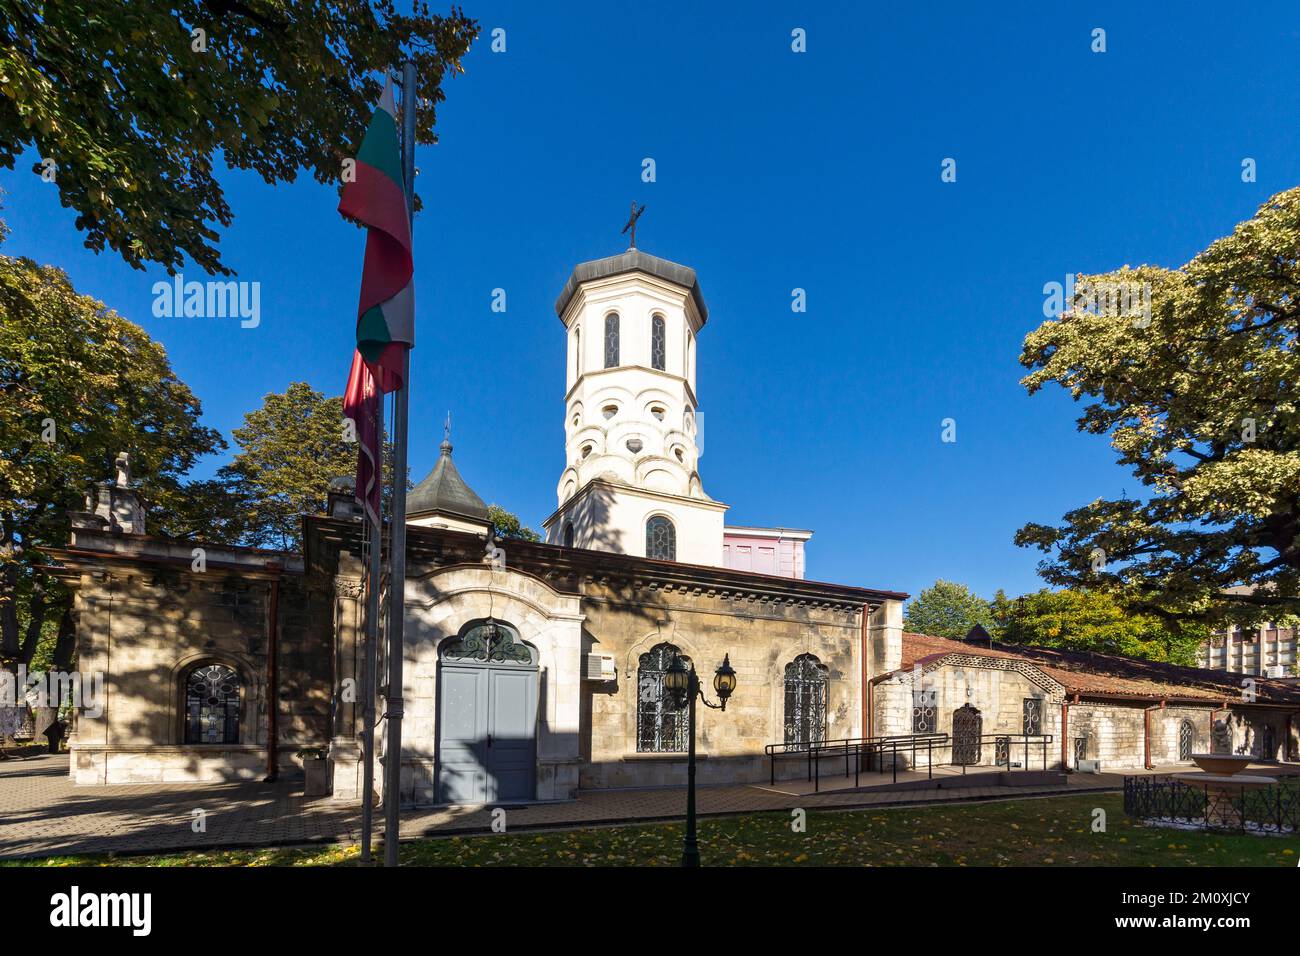 RUSE, BULGARIA -NOVEMBER 2, 2020: Typical Building and street at the center of city of Ruse, Bulgaria Stock Photo